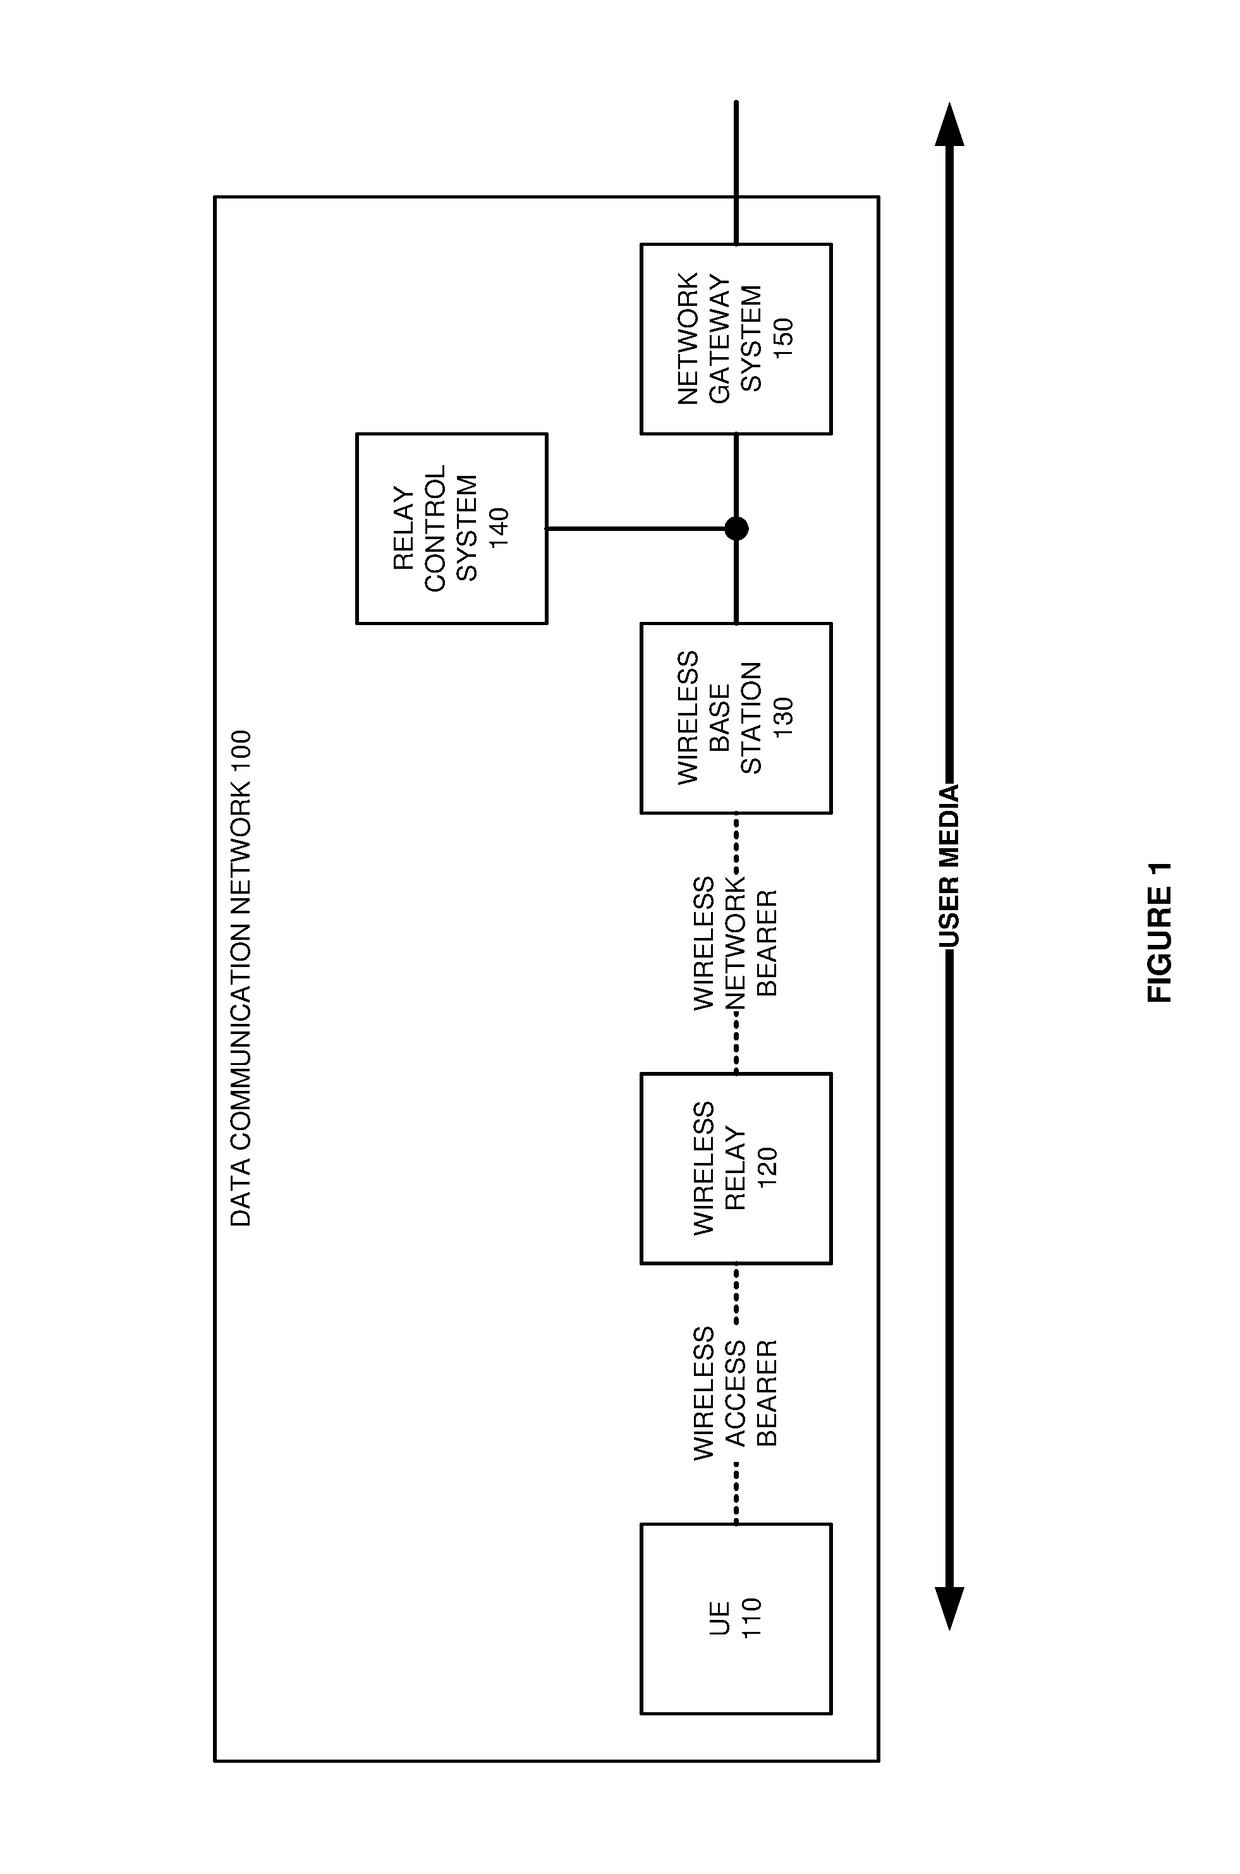 Media service delivery over a wireless relay in a data communication network